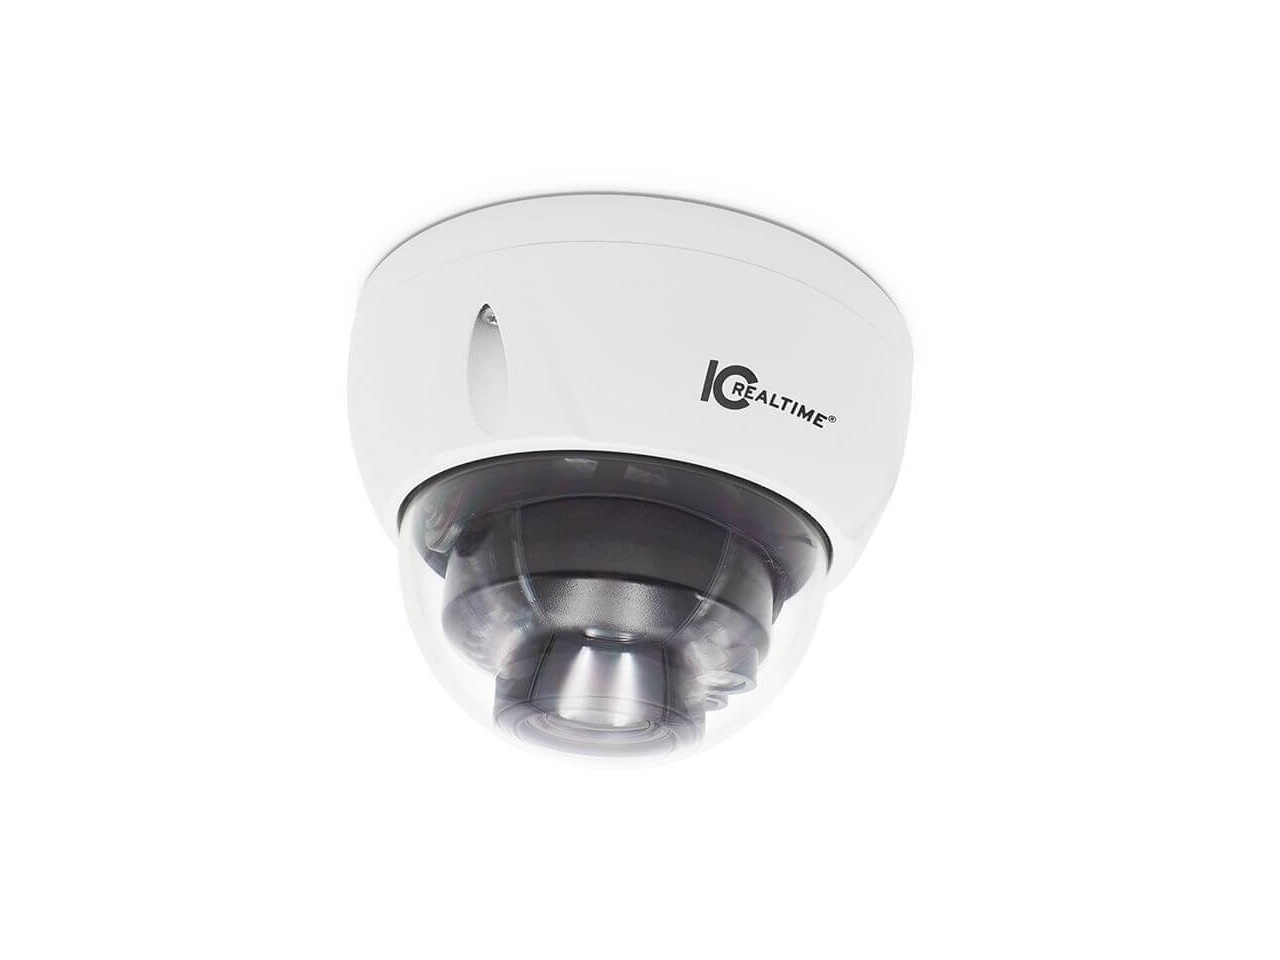 IPEG-D40V-IRW2 4MP IP Indoor/Outdoor Mid Size Vandal Dome Camera/131ft Smart IR/PoE Capable by ICRealtime